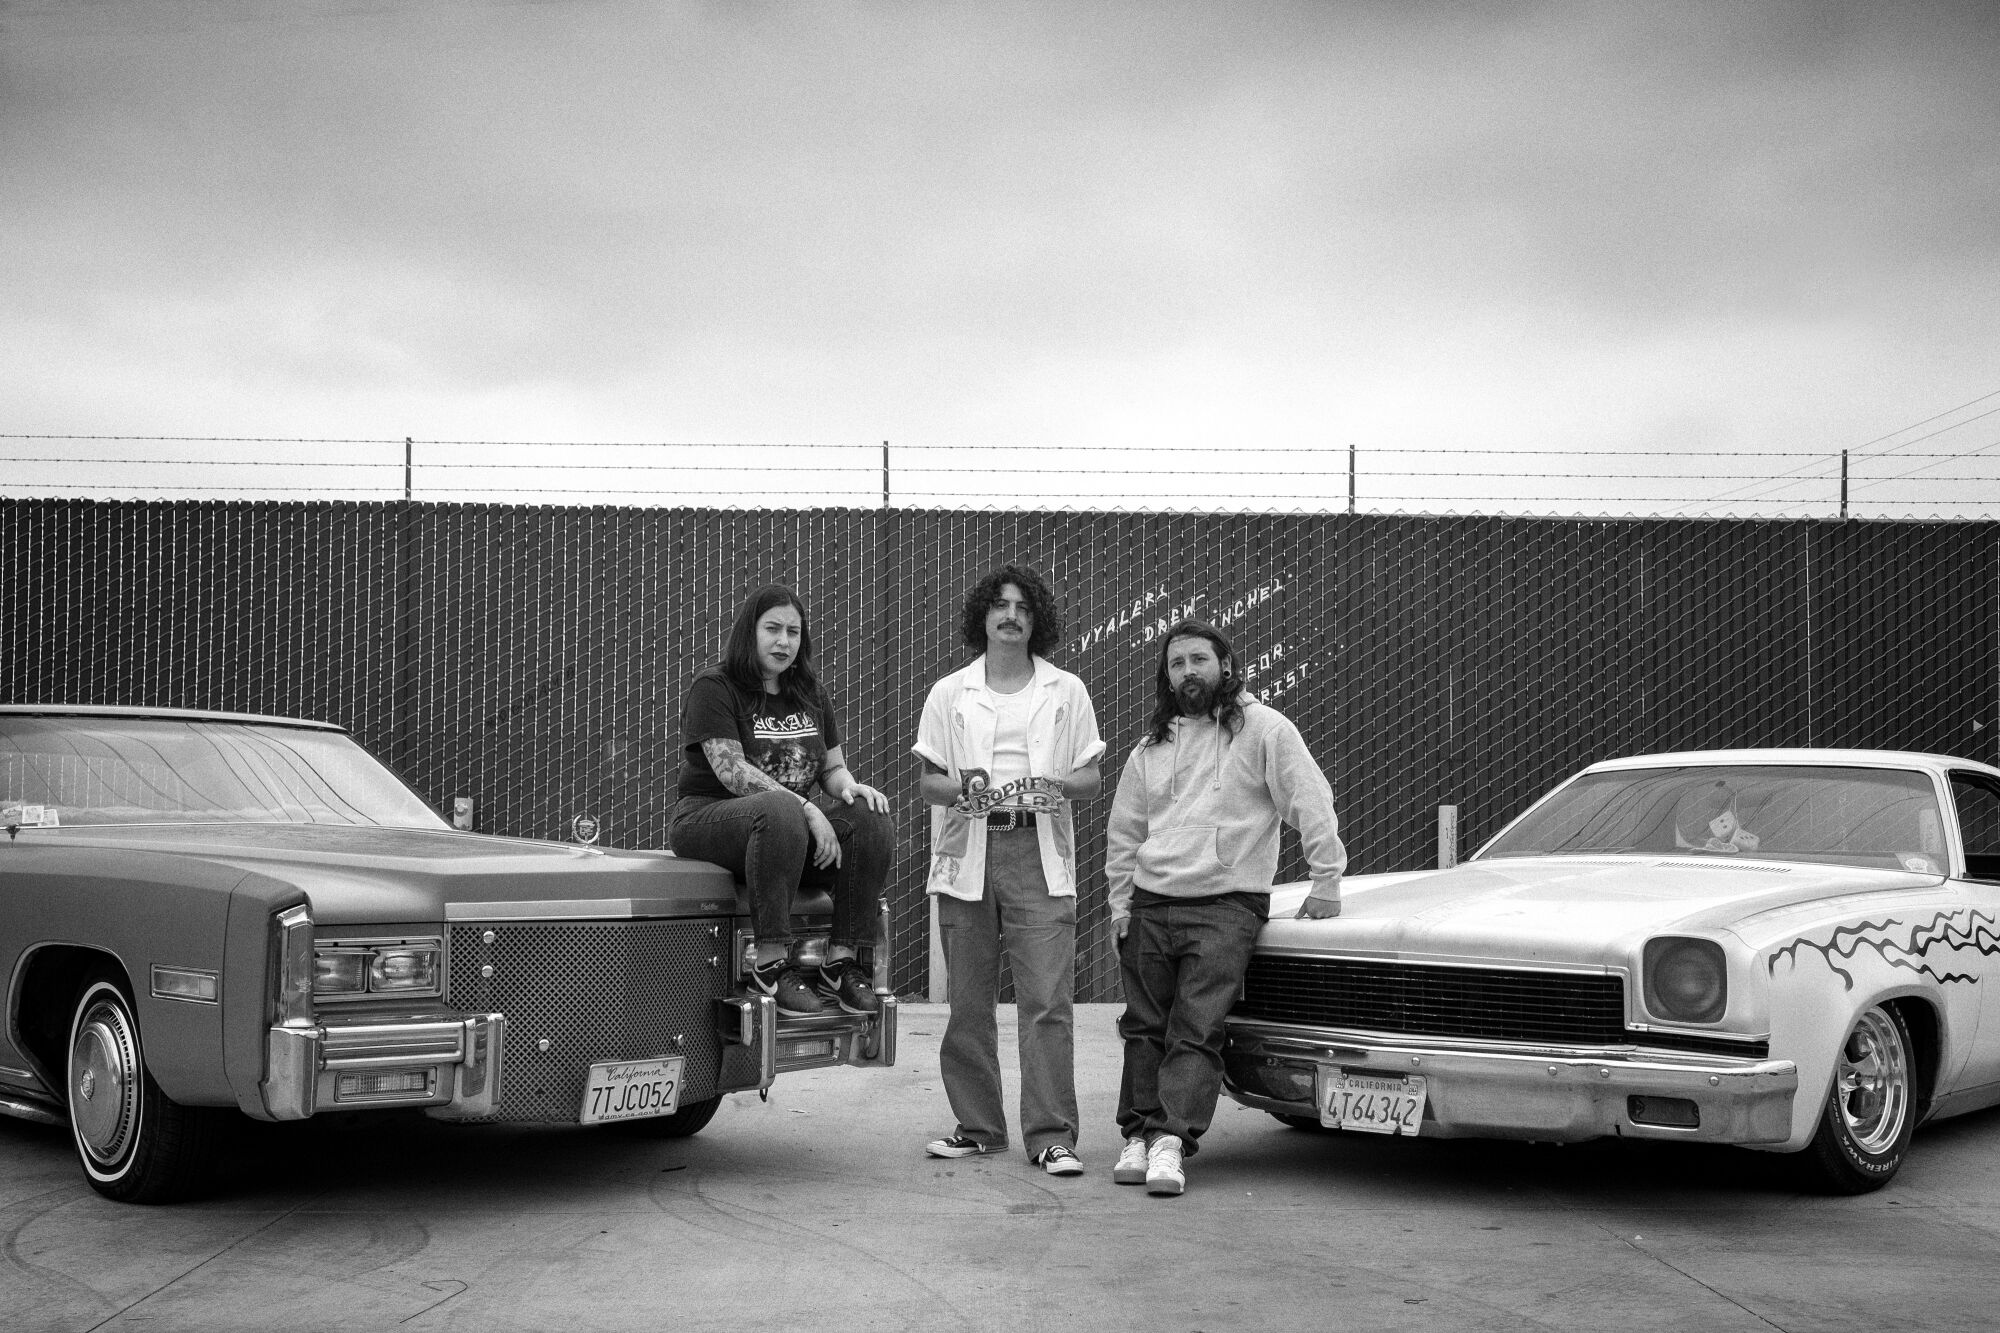 Jacqueline Valenzuela, Jesse Jaramillo, and Mark Hocutt posing by their two classic cars